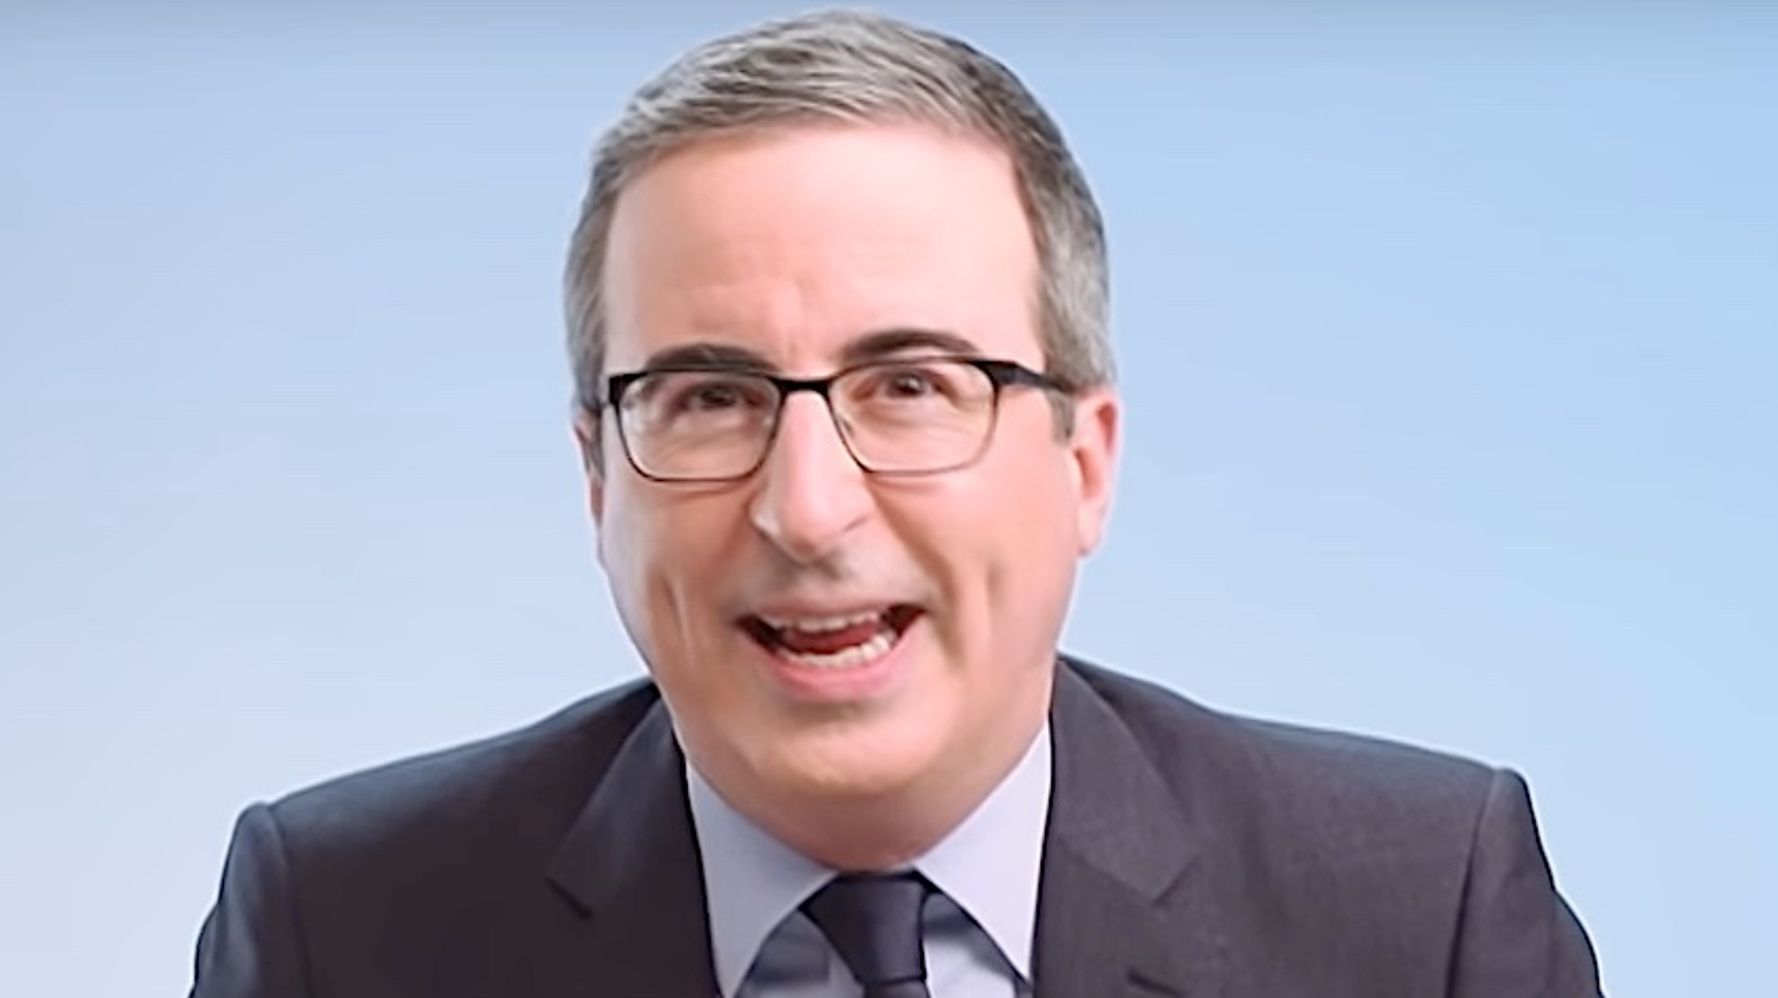 John Oliver Reveals Where Americans Are Literally Treated Worse Than Pigs